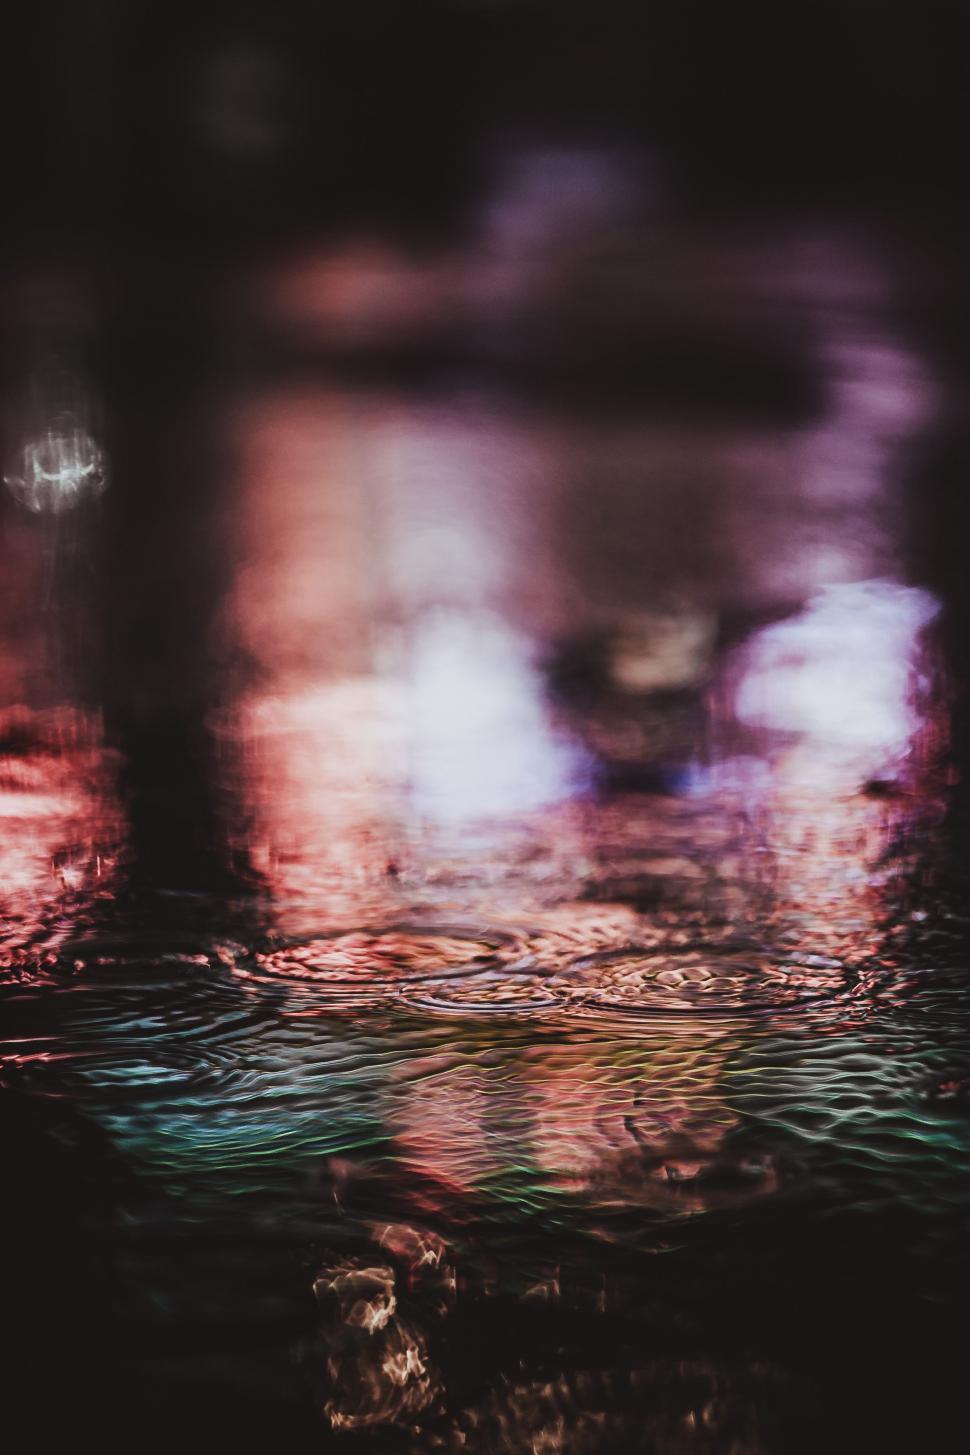 Free Image of Blurry Street With Rain Drops 